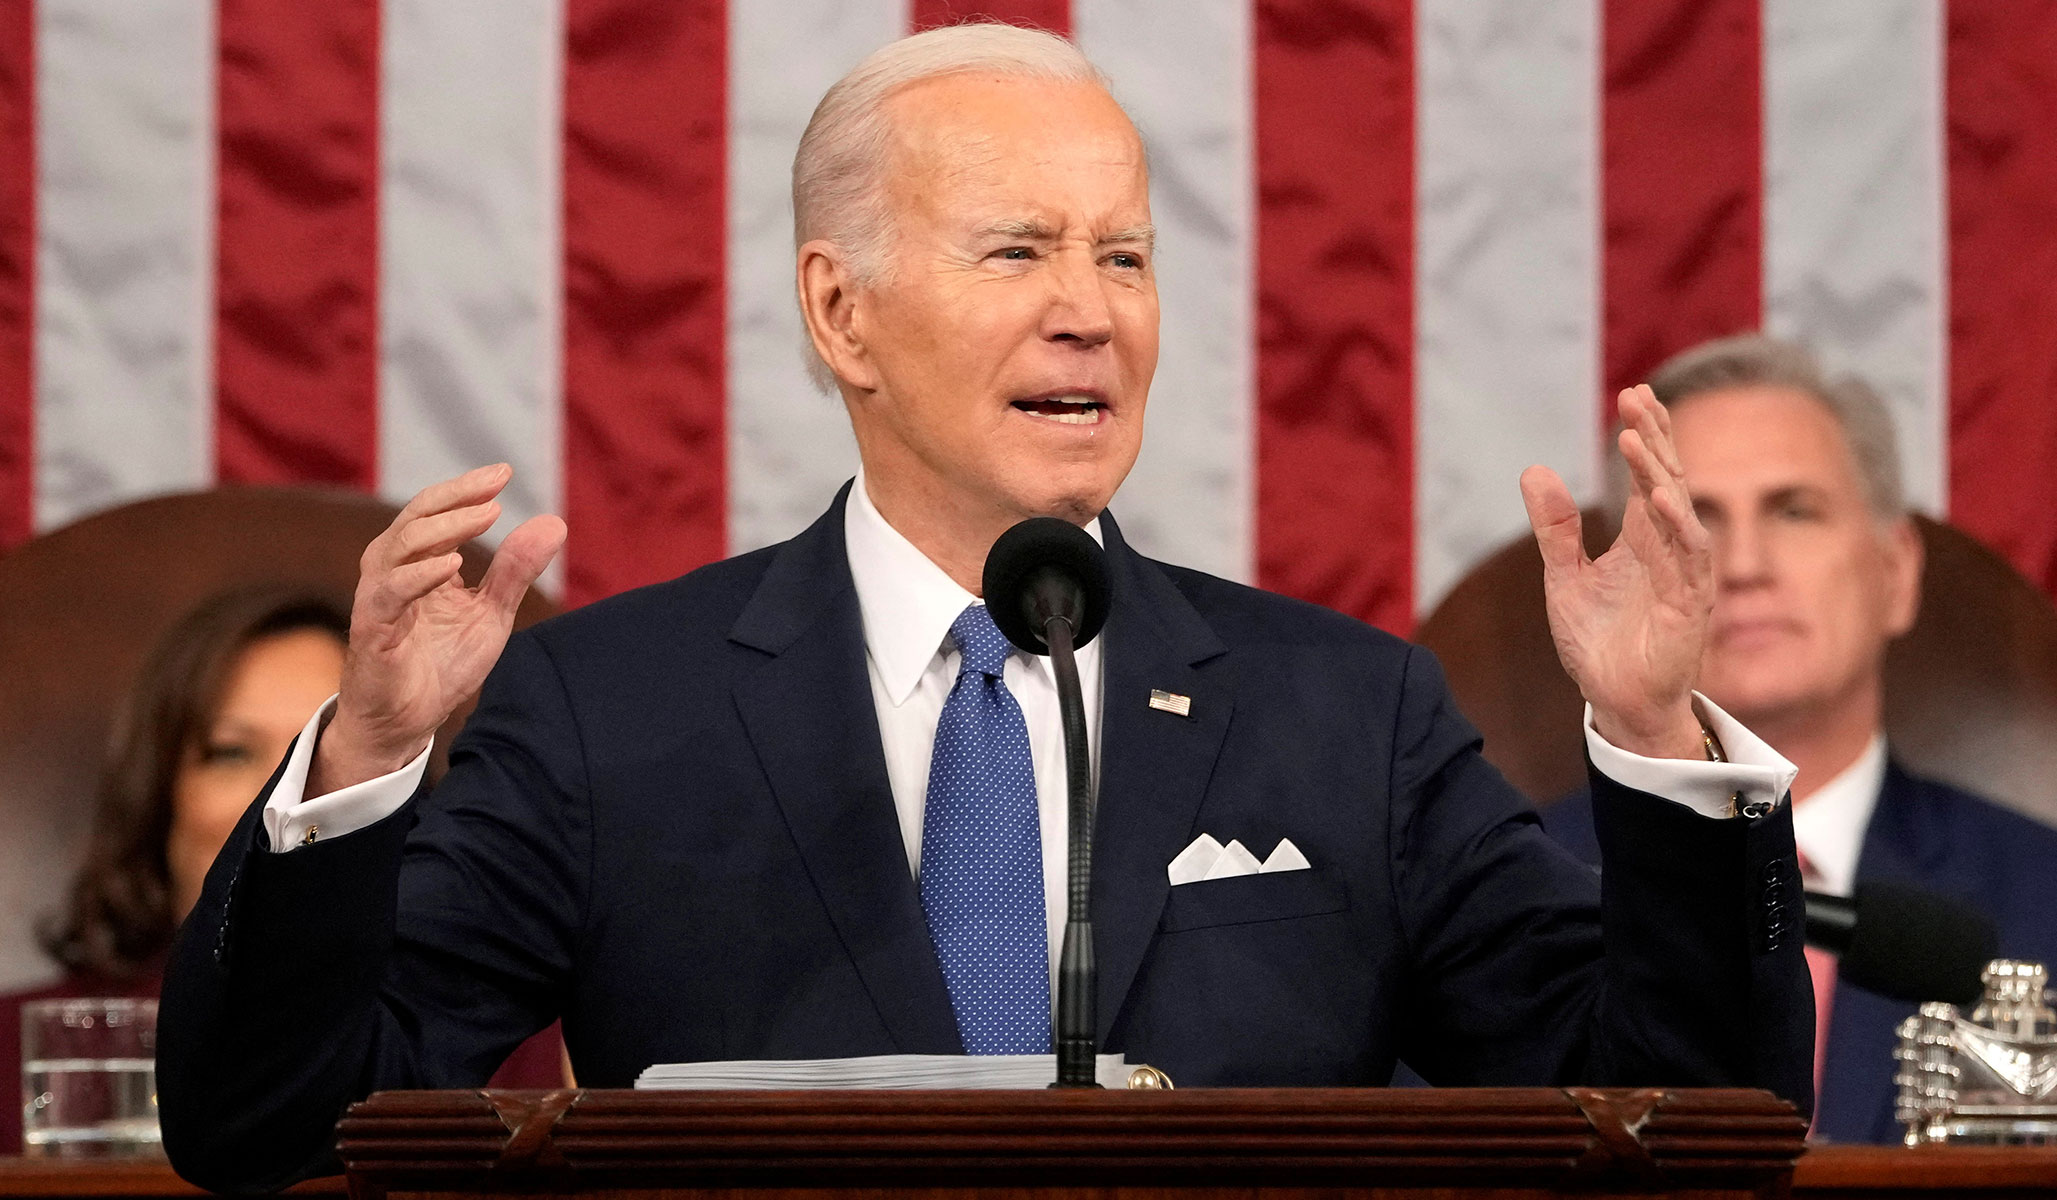 NextImg:Oil and Reality: When Joe Biden Said (Some of) the Quiet Part Out Loud 